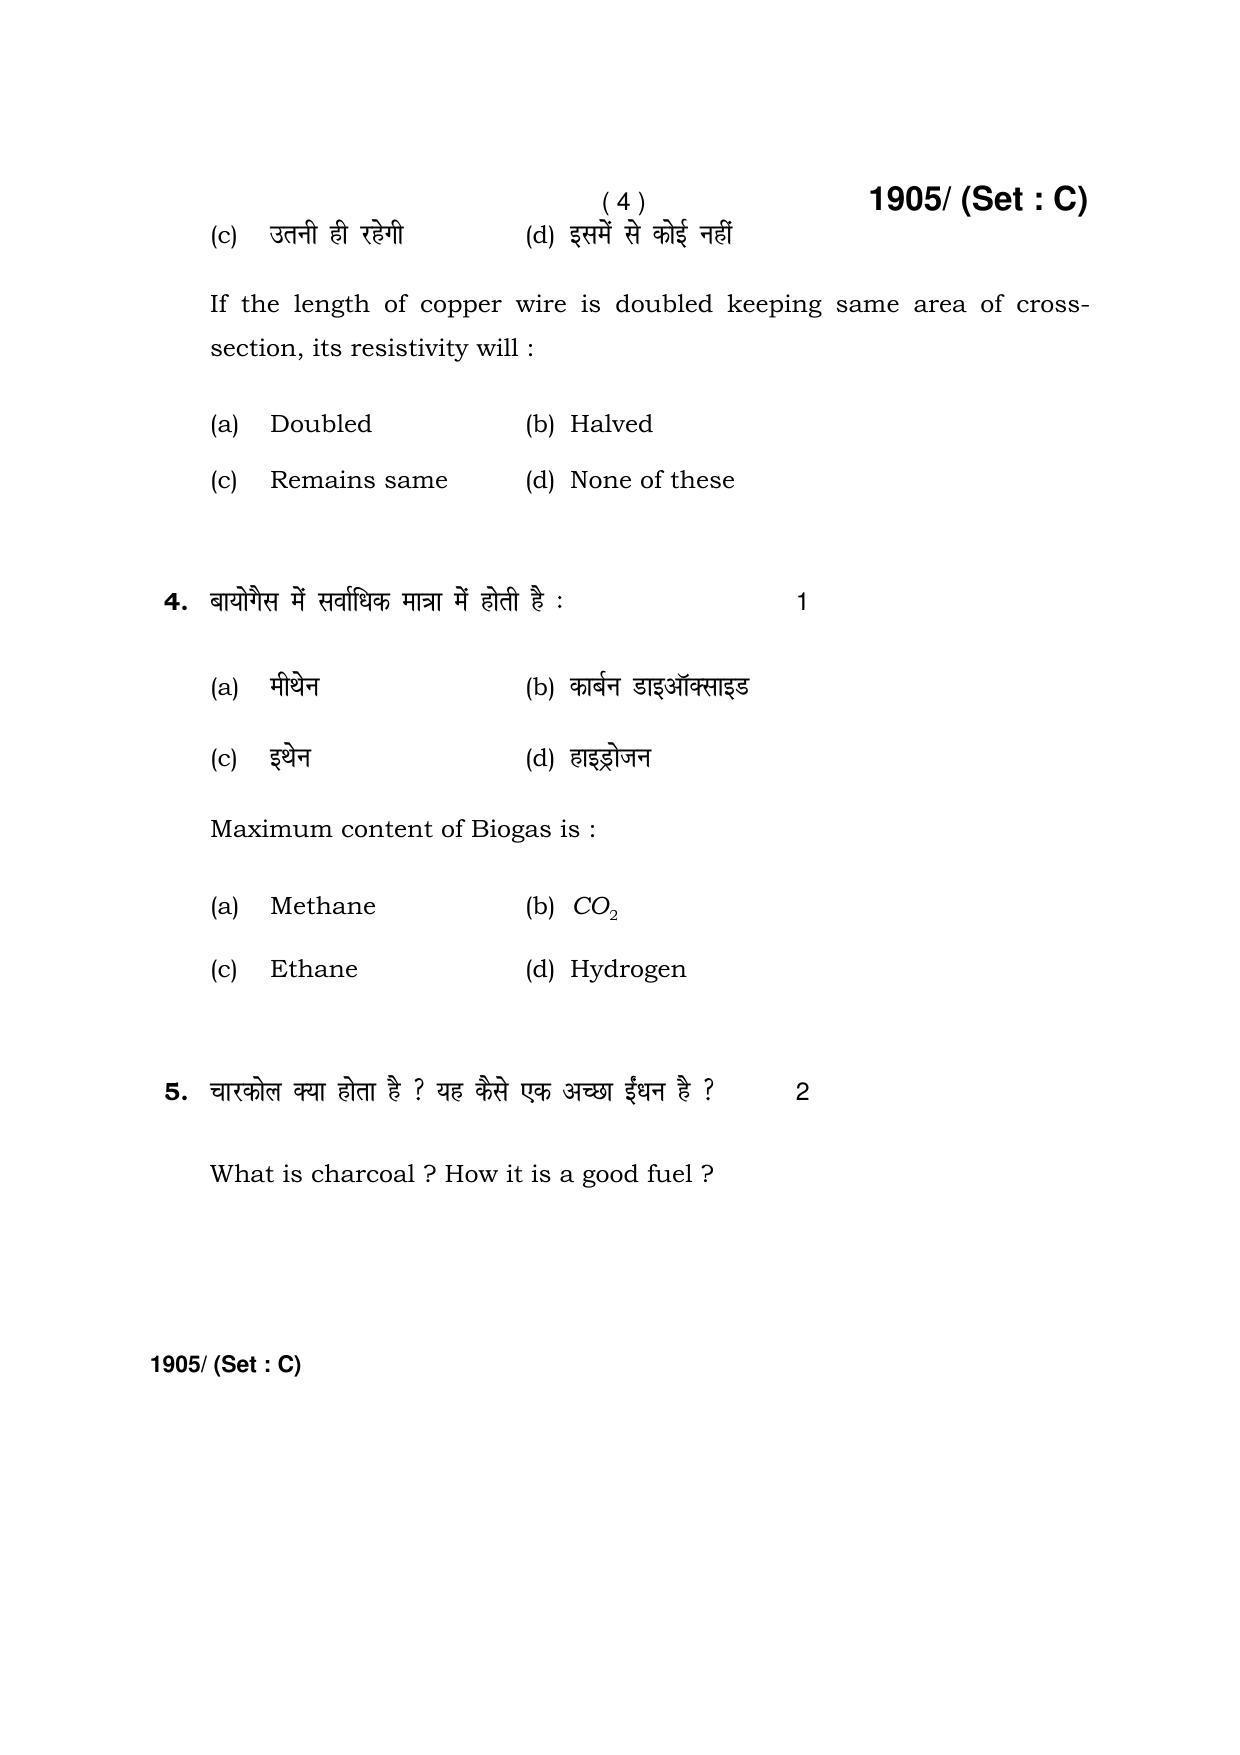 Haryana Board HBSE Class 10 Science -C 2017 Question Paper - Page 4